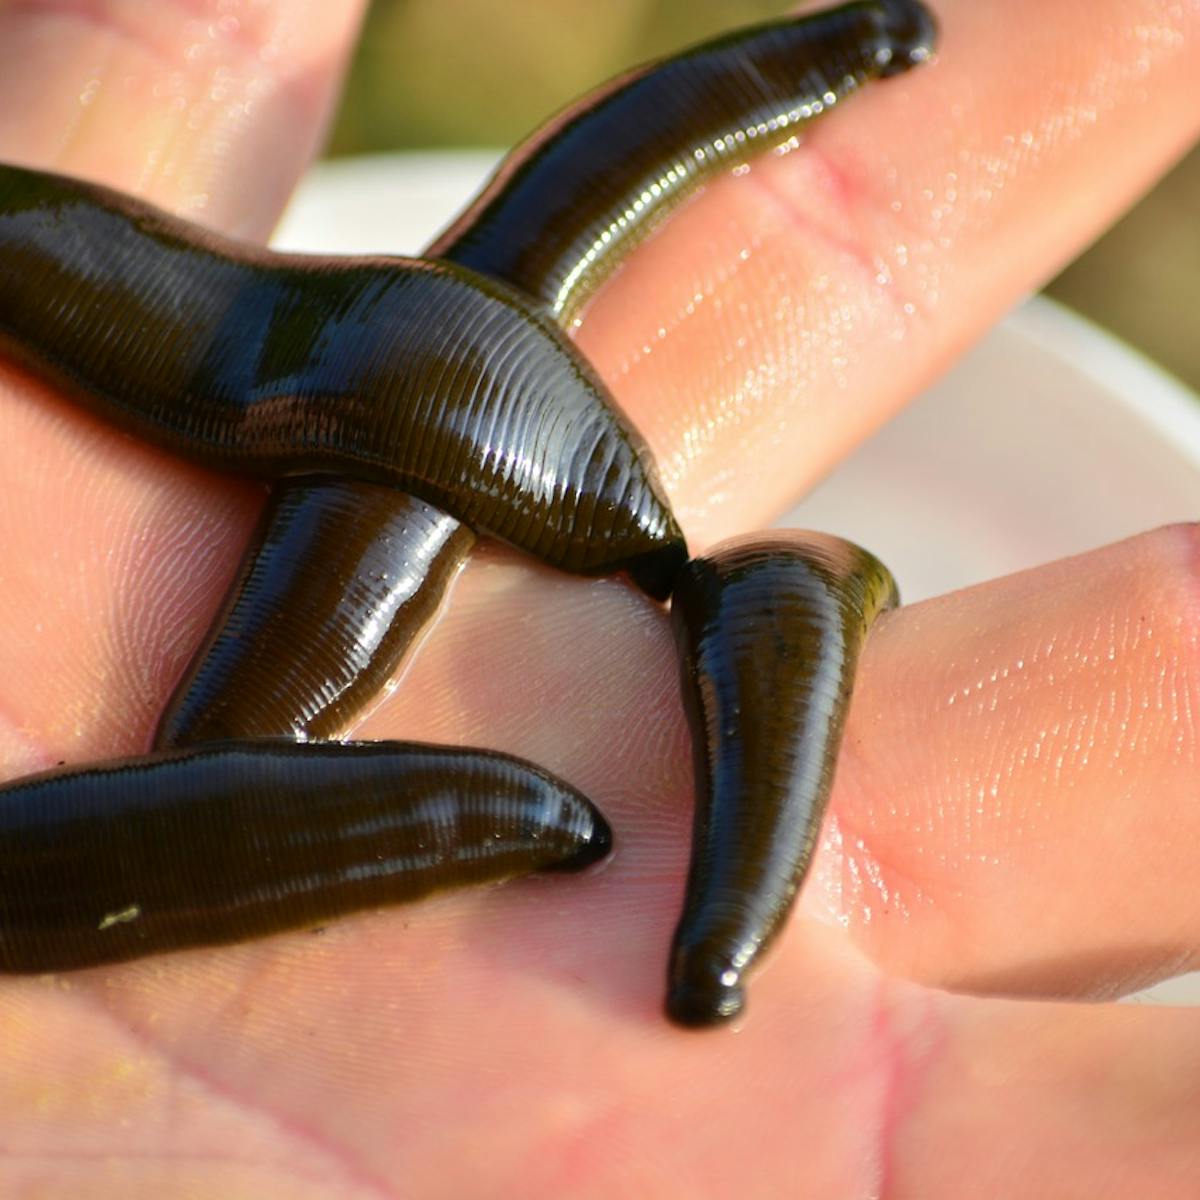 Curious Kids: why do leeches suck our blood?